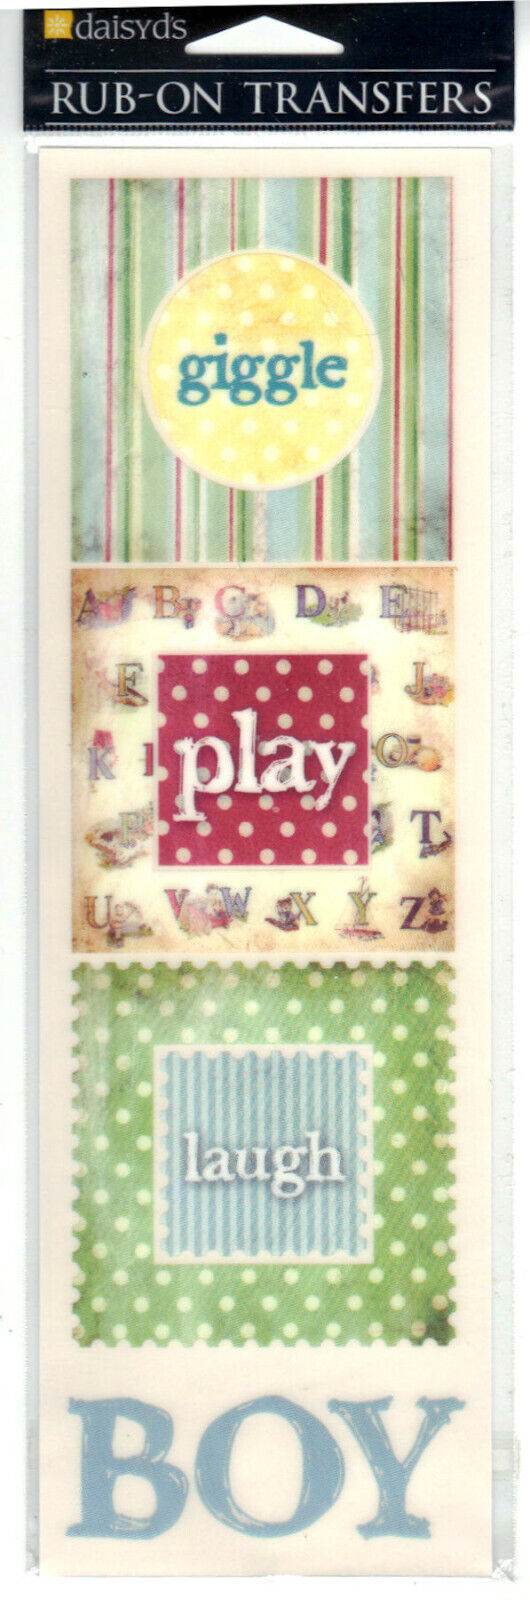 25% OFF DaisyDs BABY BOY FRAMES Rub-On Transfers Now on sale scrapbooking GIGGLE PLA